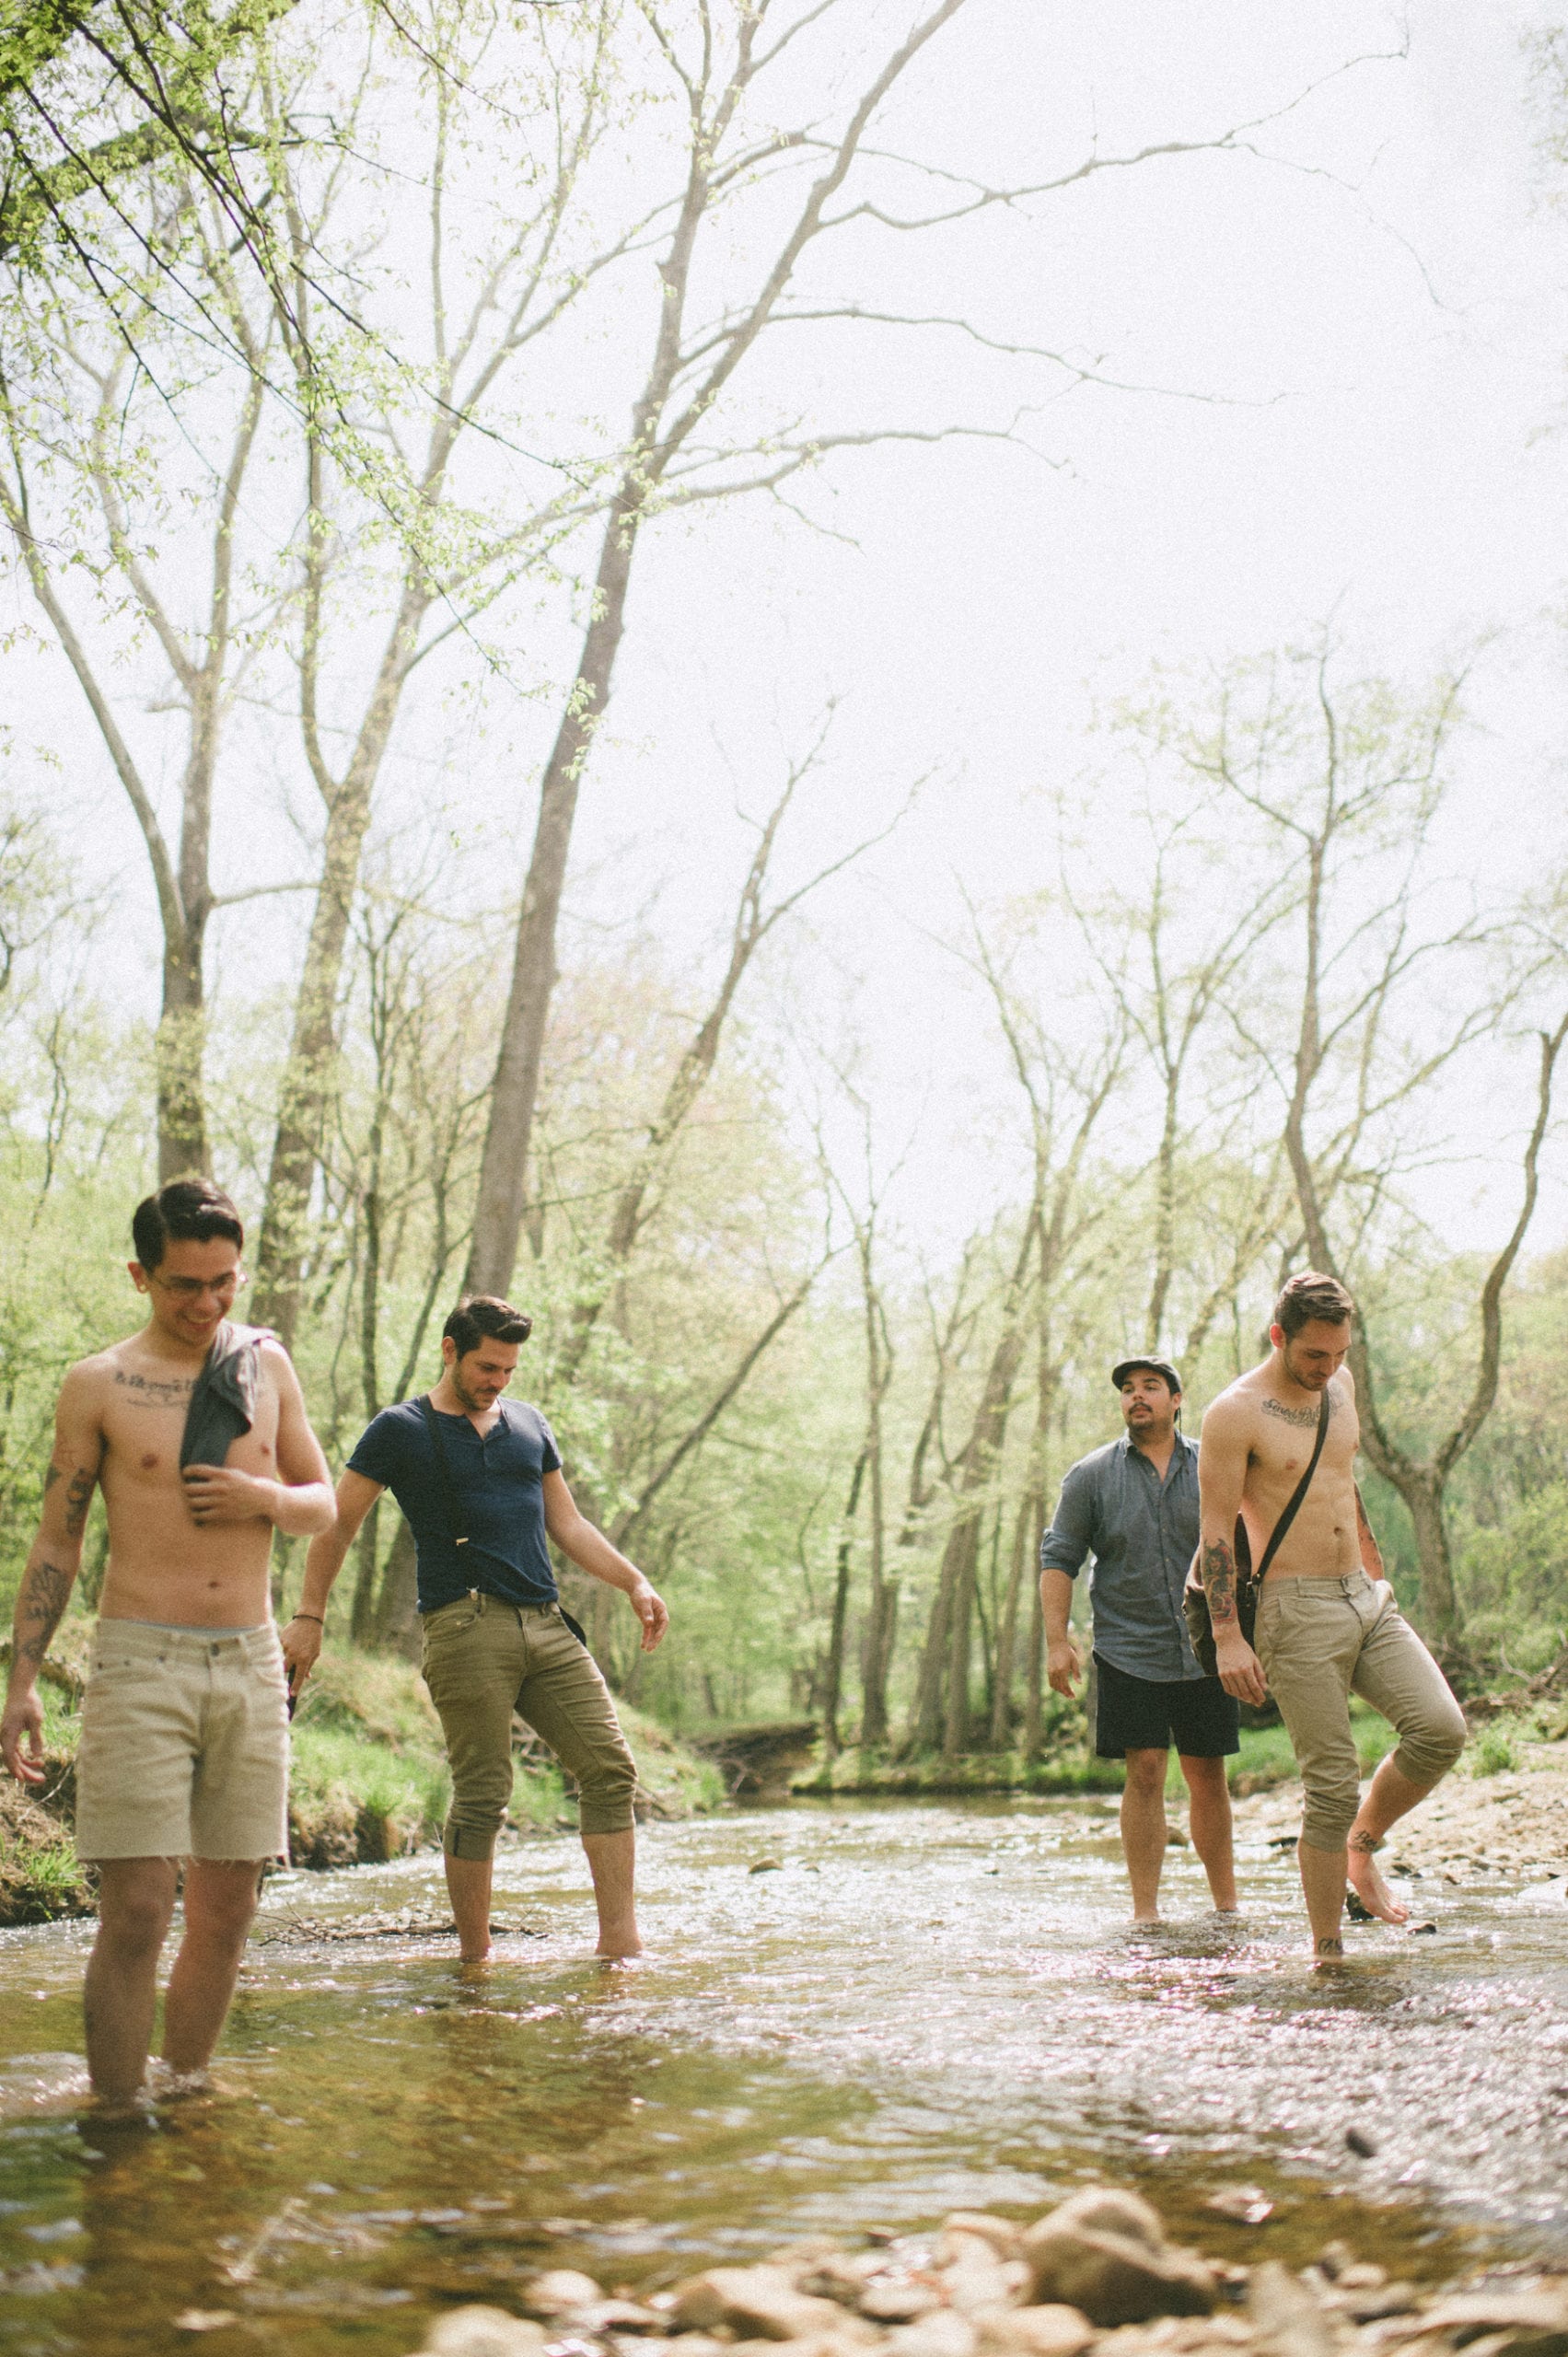 Kids American Indie Rock Band Four males walking in a creek on a sunny day in the forest. Two males are shirtless with tattoos on their arms and chest.